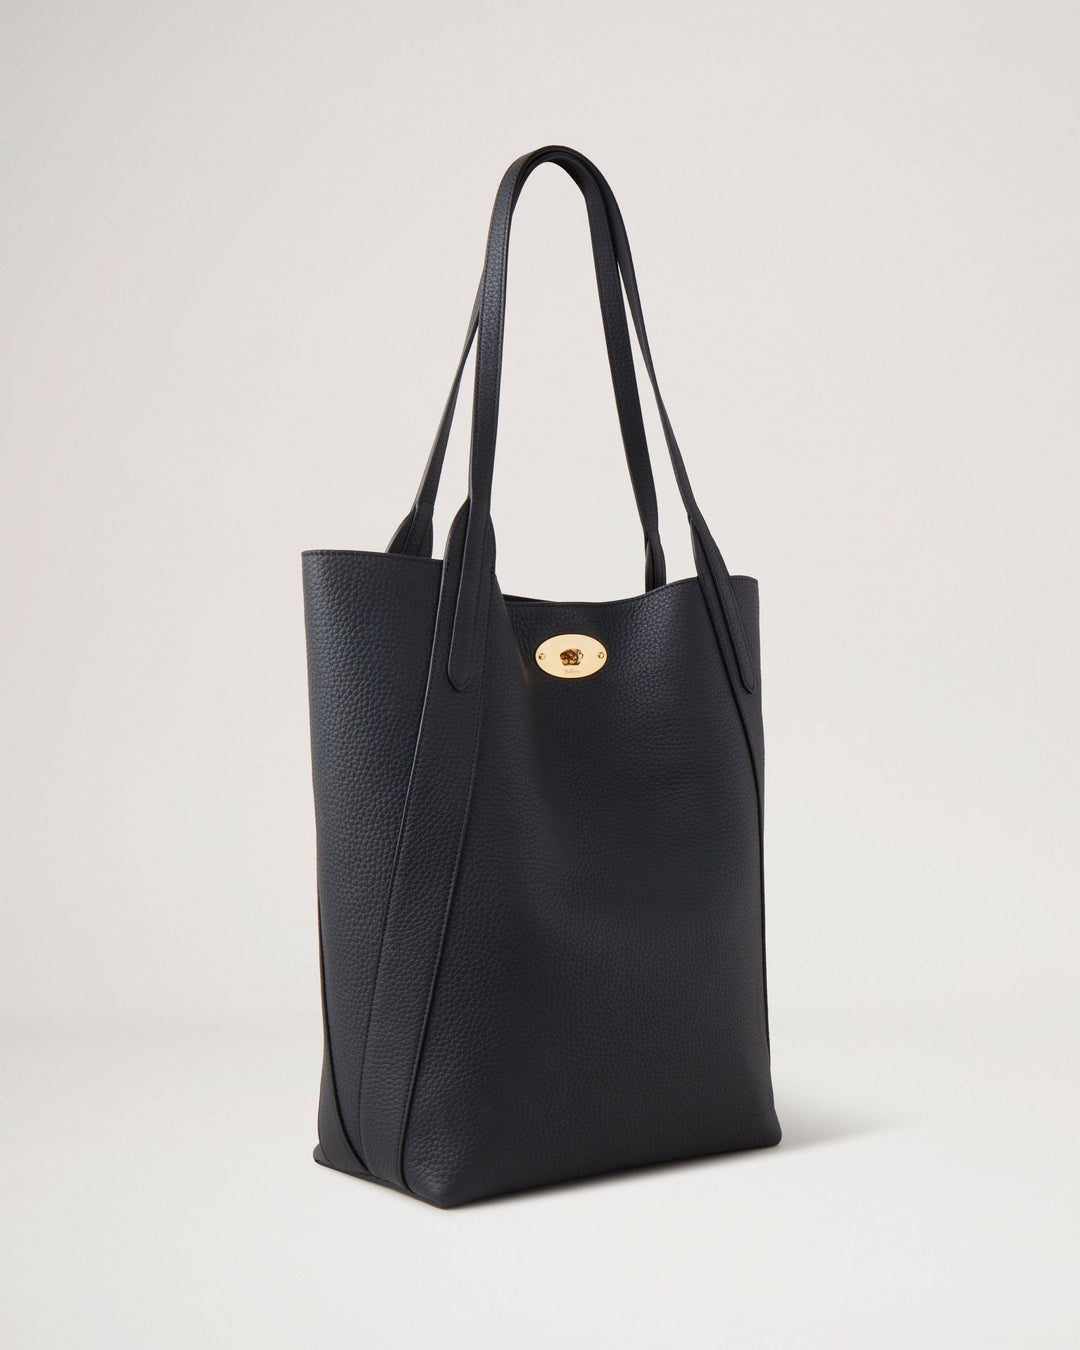 Mulberry-Bayswater-Tote-Heavy-Grain-Black-3